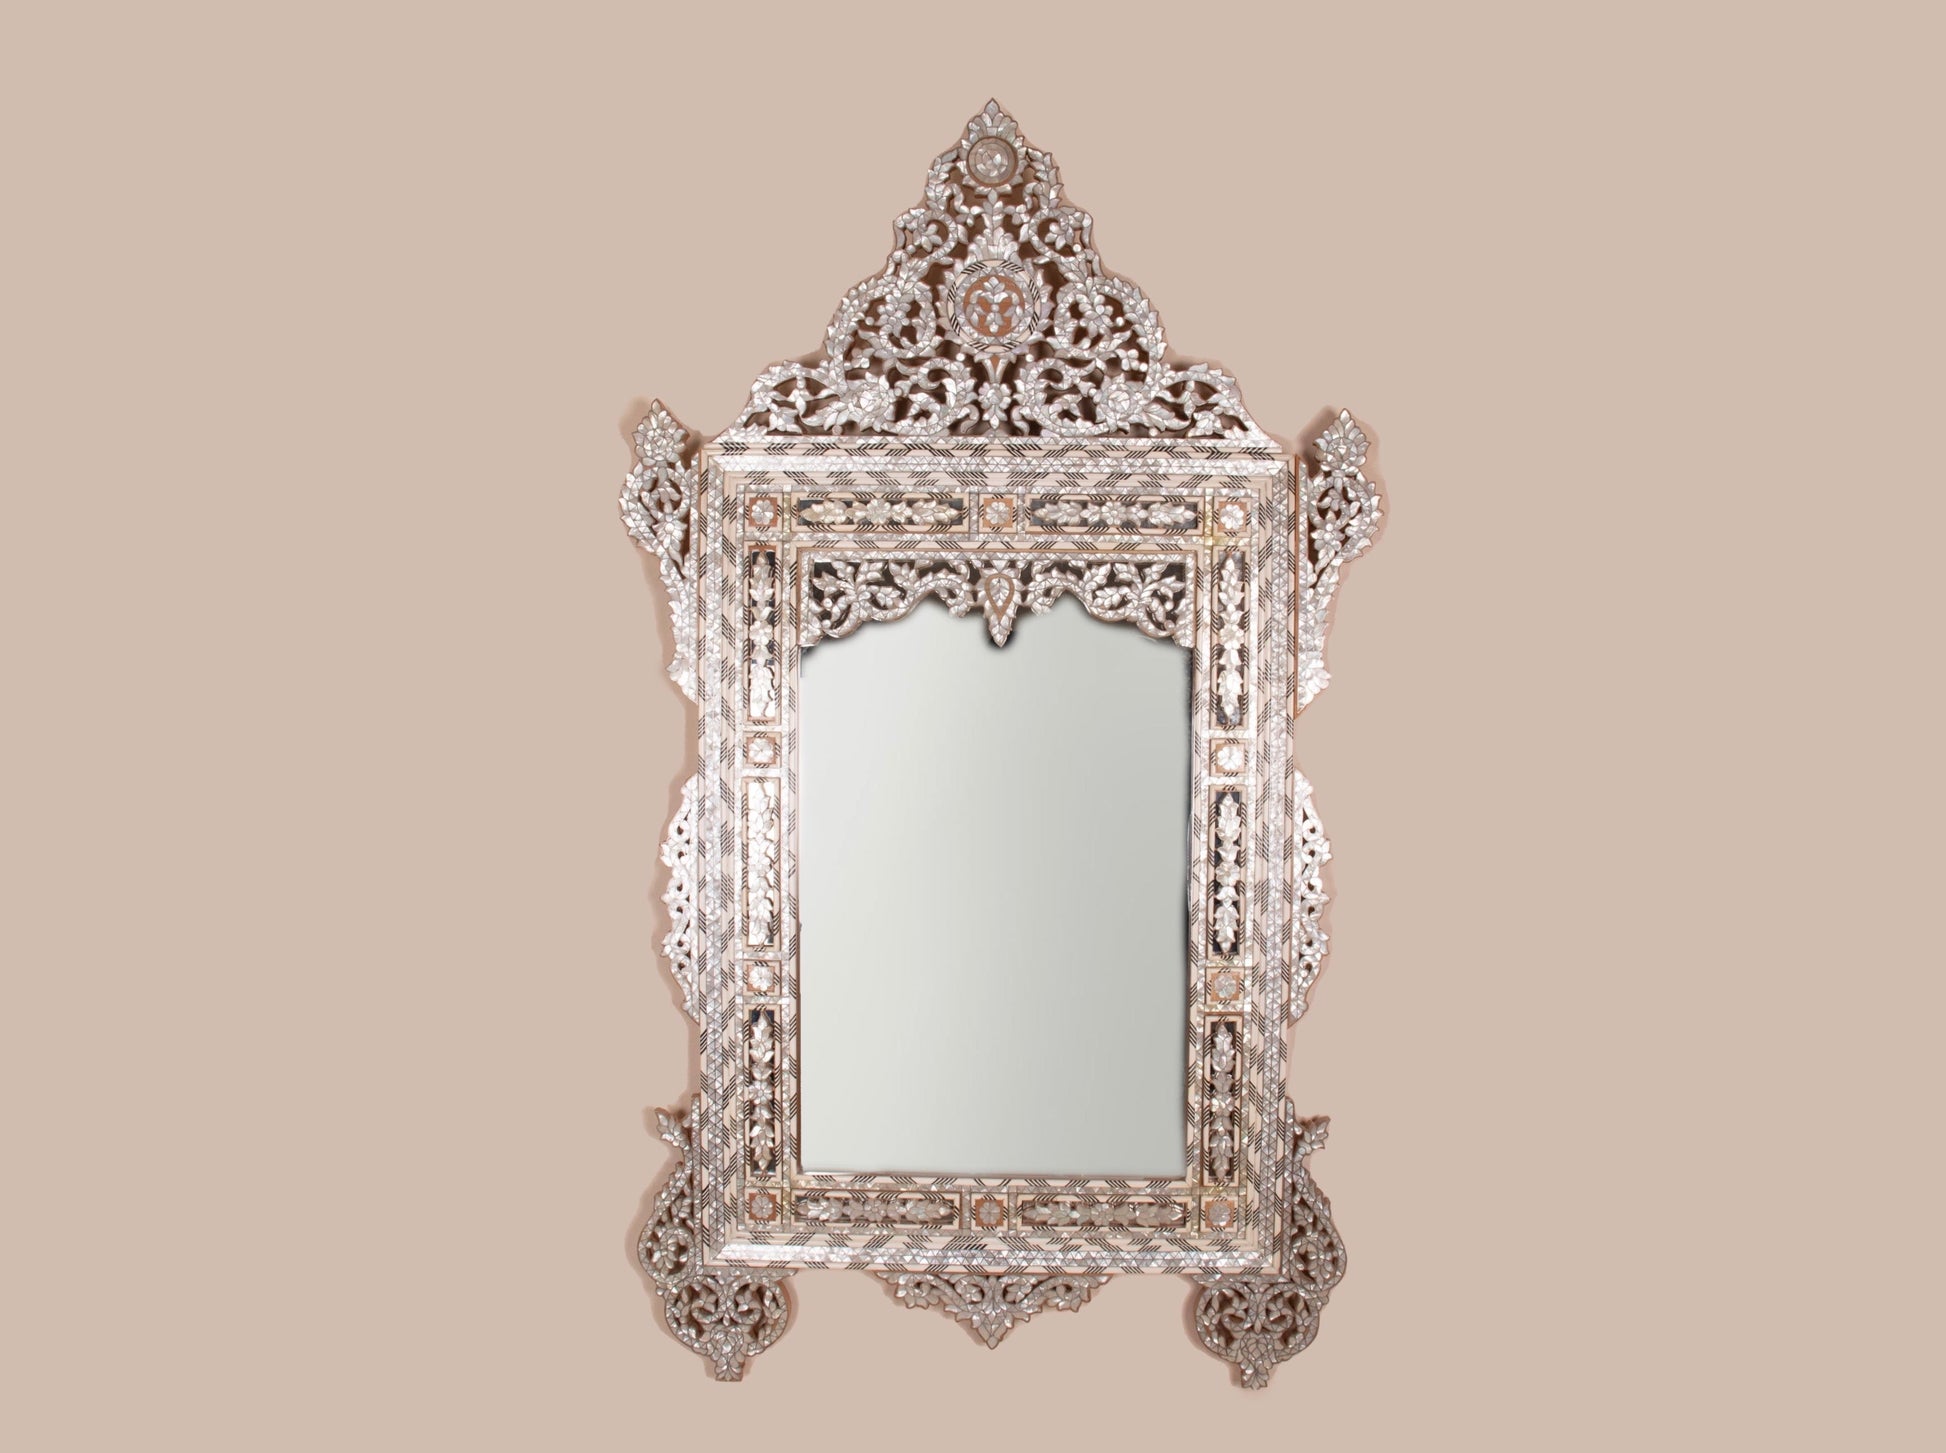 Mirror - Covered in Mother of Pearl (Nacreous)